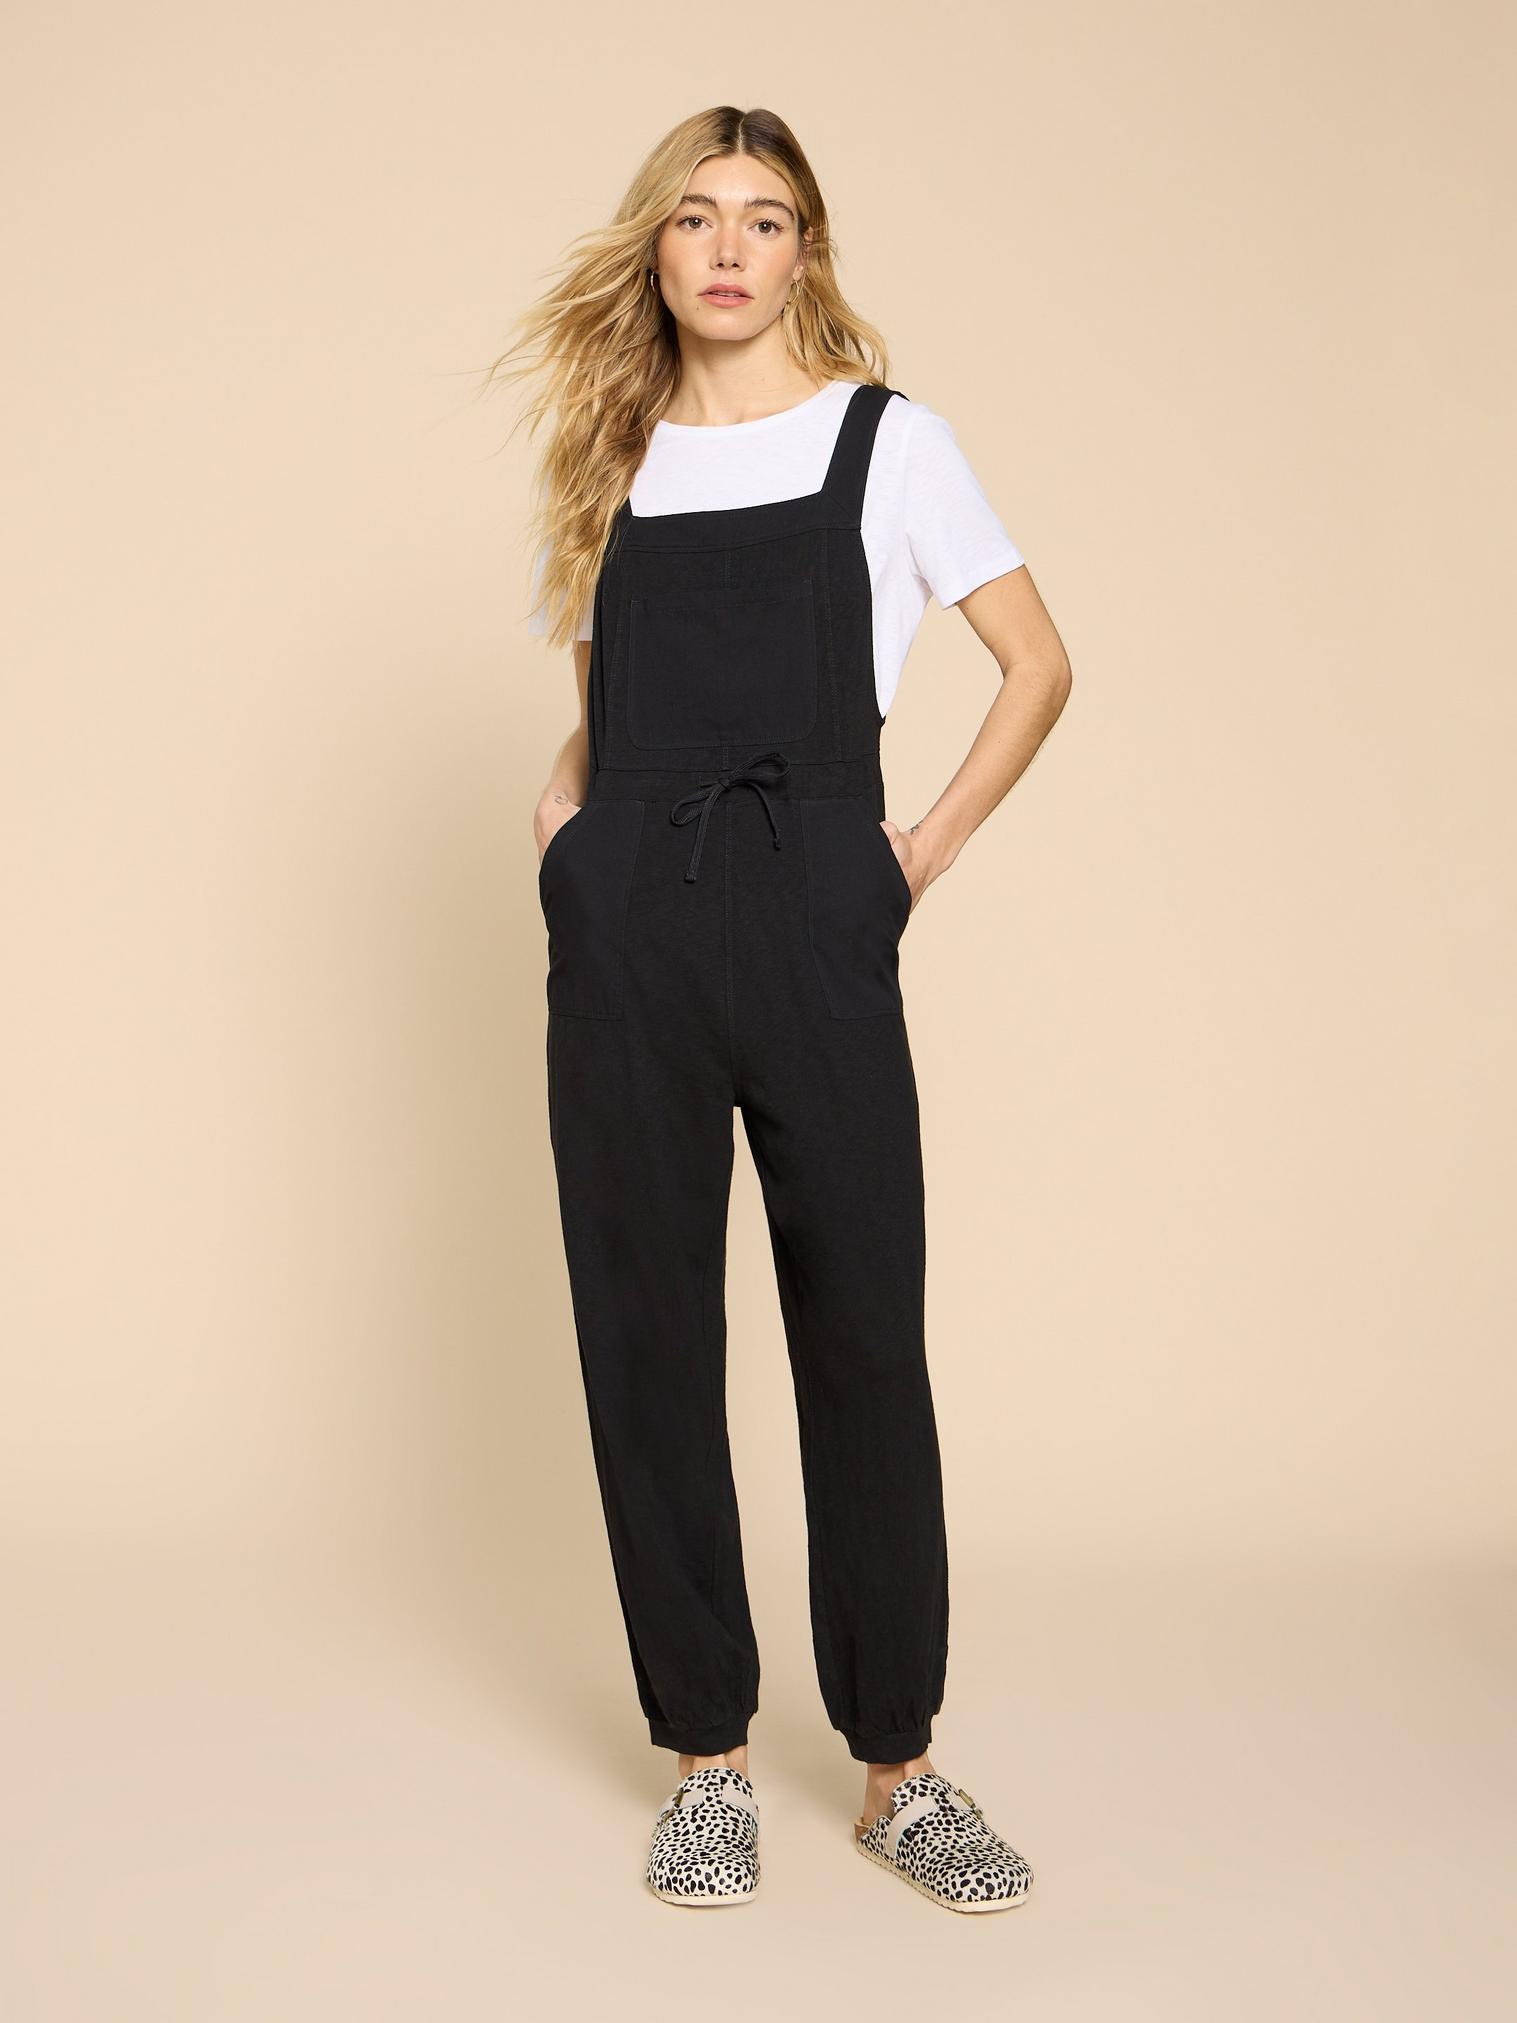 Daphne Jersey Dungaree in PURE BLK - MODEL FRONT